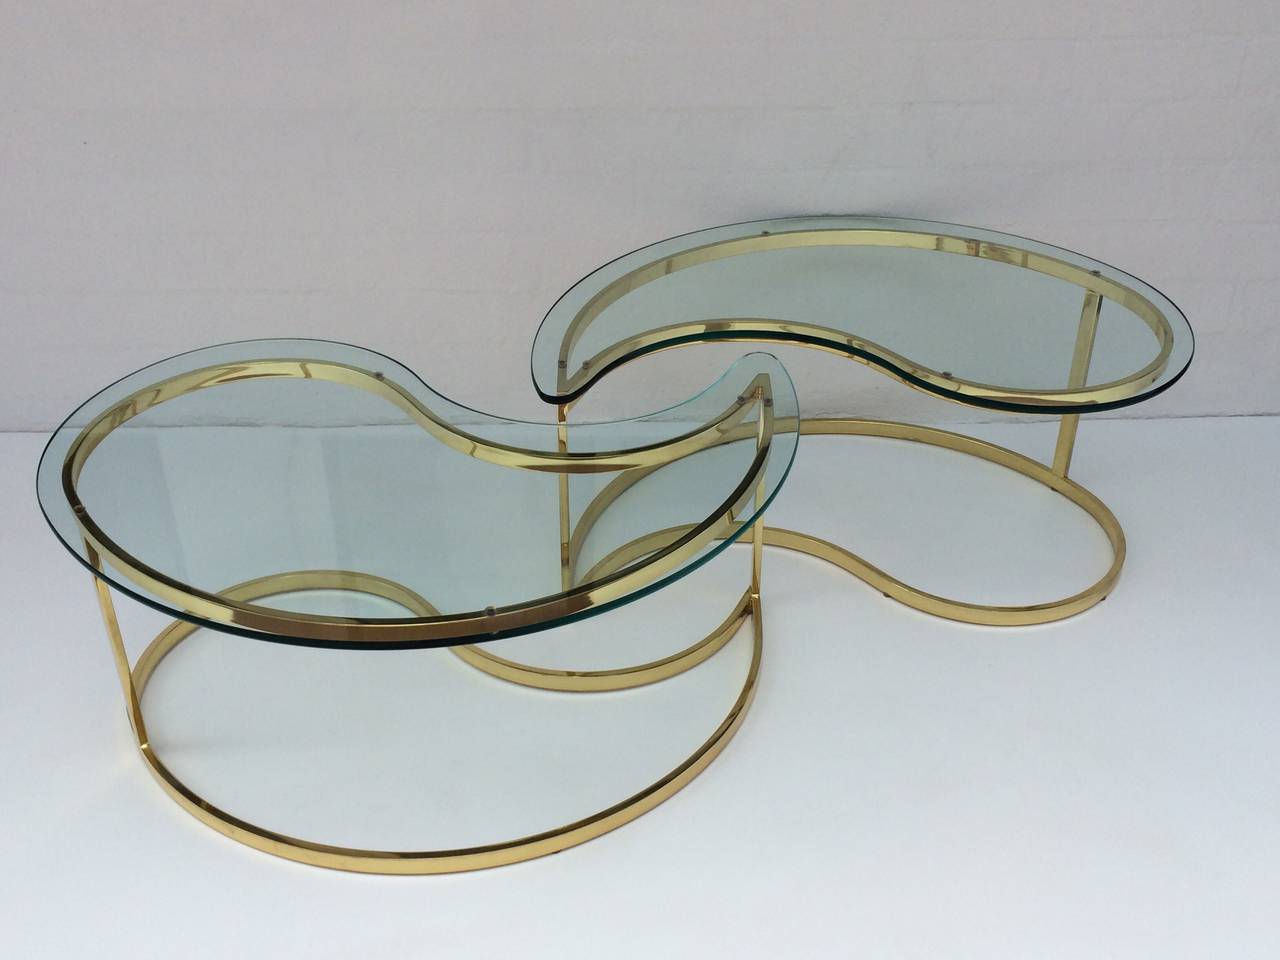 Late 20th Century Polished Brass and Glass Cocktail or Coffee Tables Designed by Milo Baughman